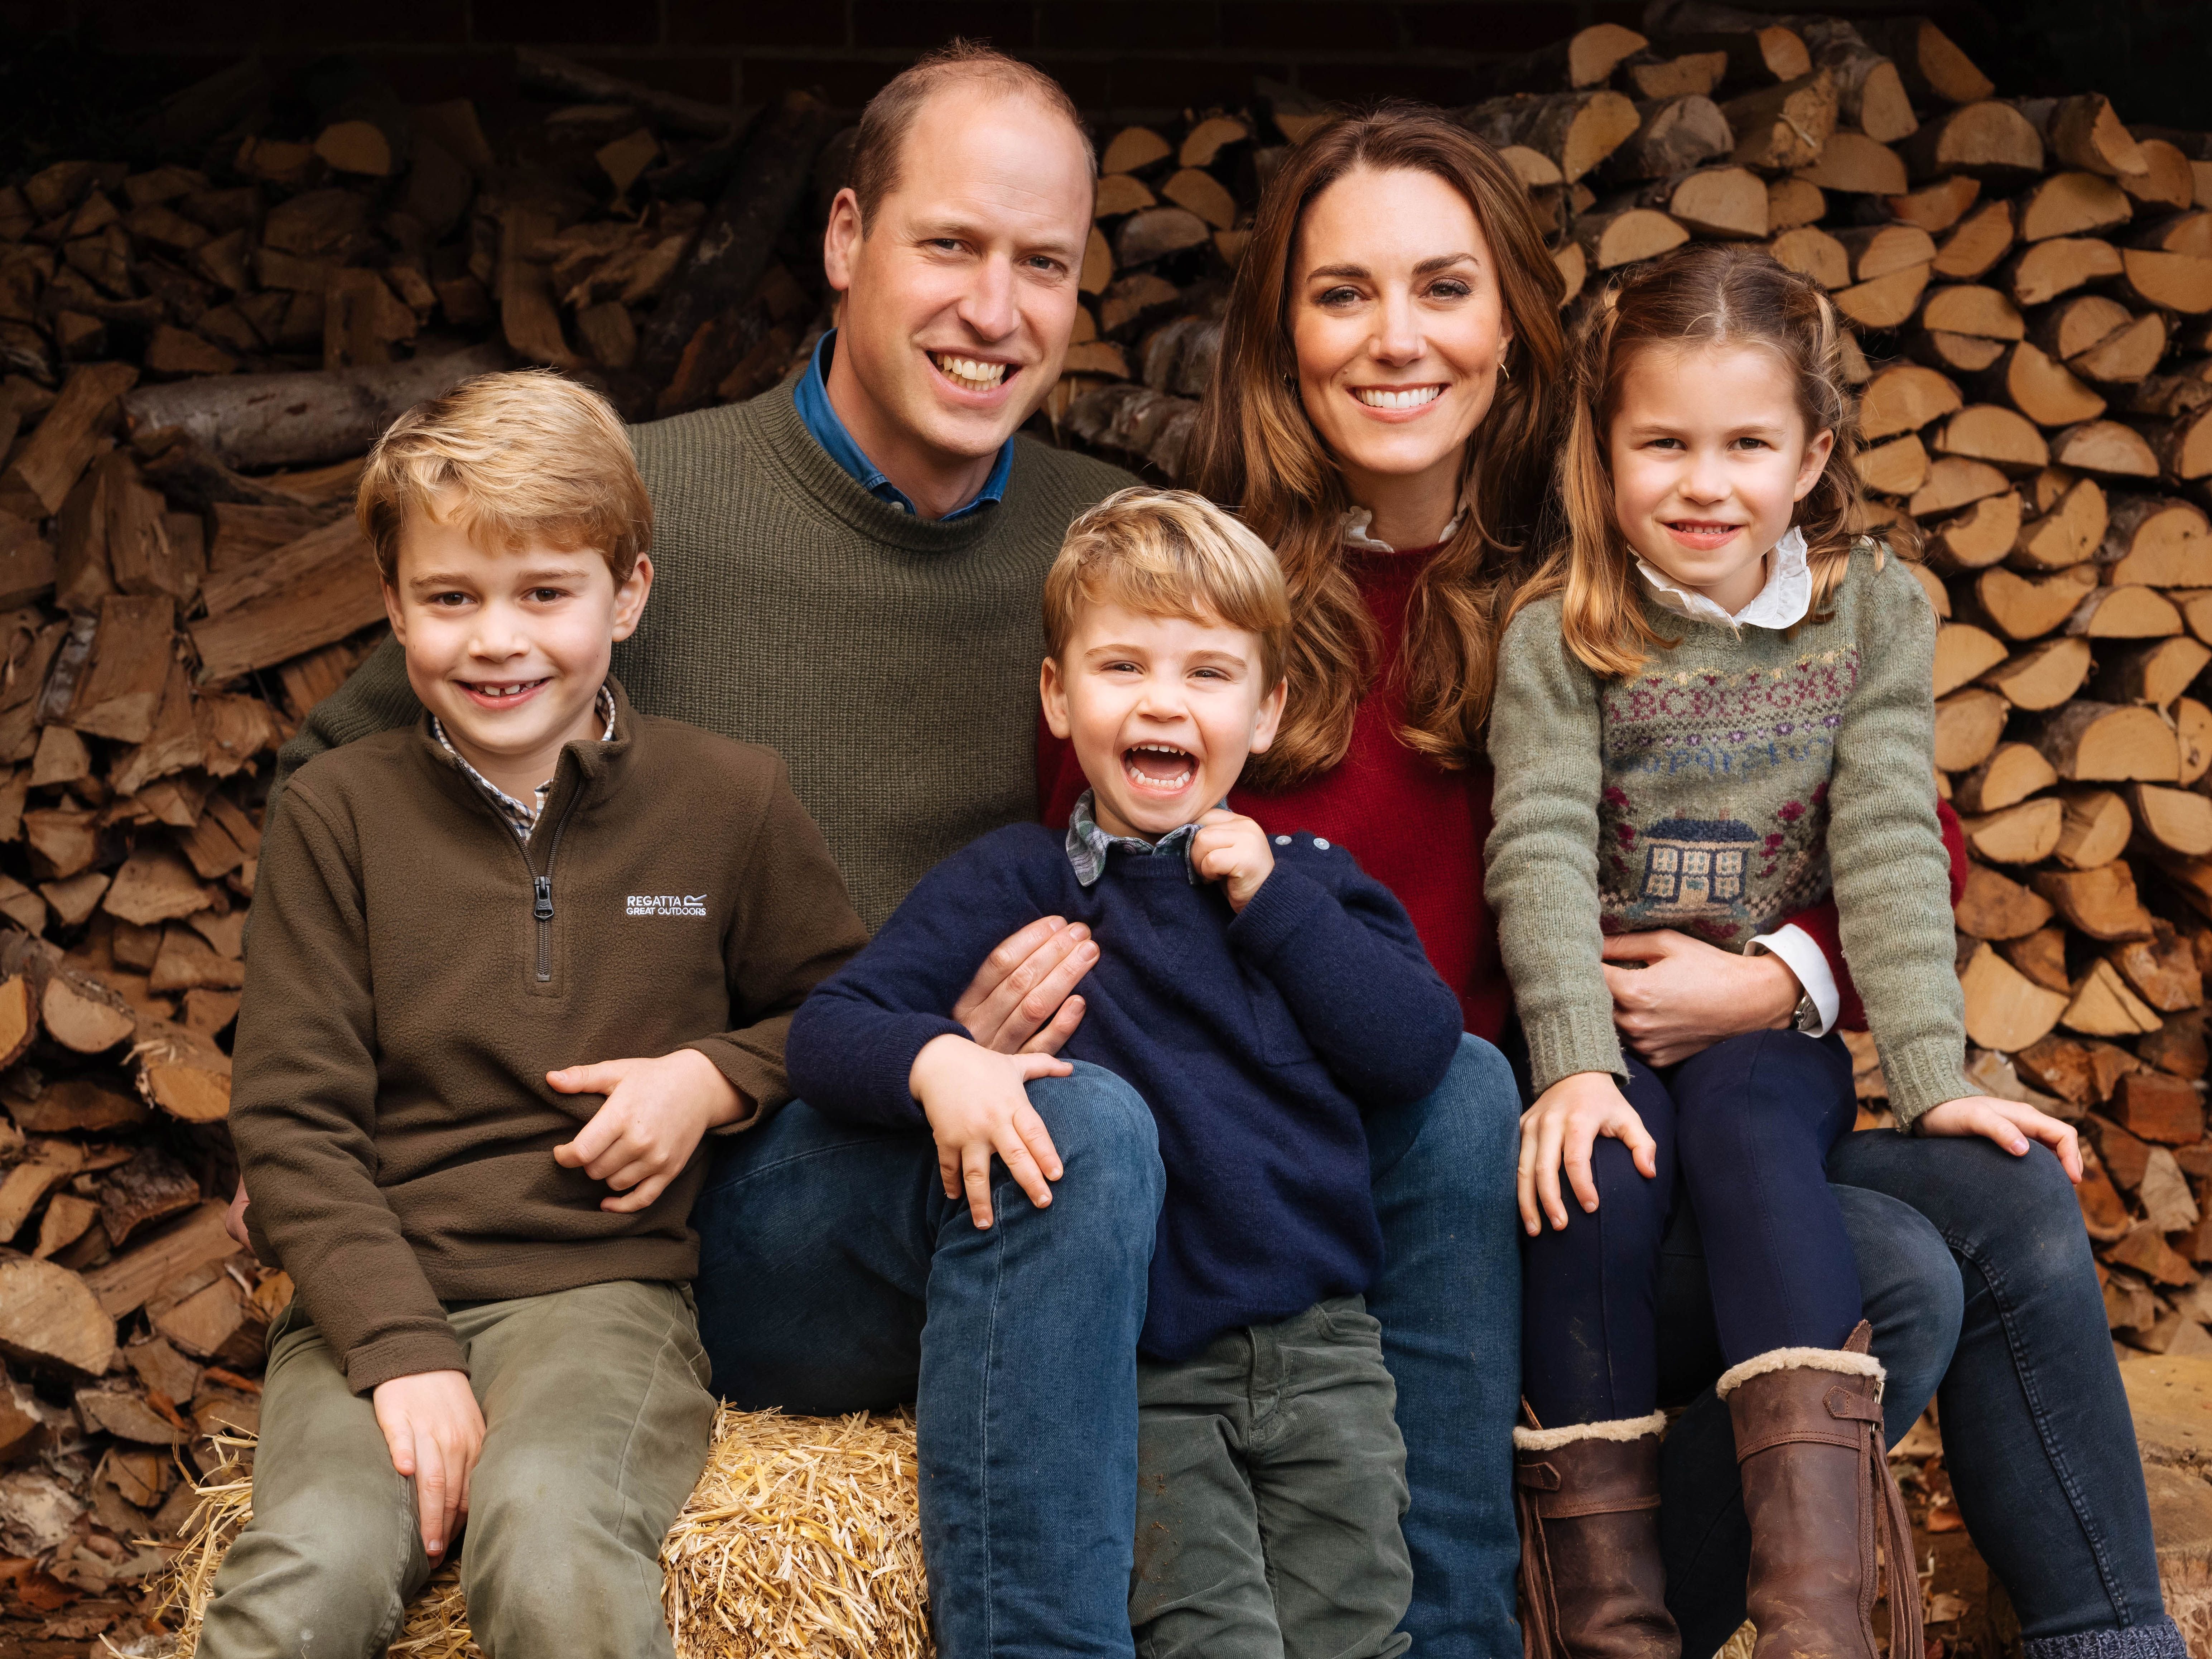 Prince William, Kate Middleton, Prince George, Princess Charlotte and Prince Louis posing for the Cambridges' 2020 Christmas card at Anmer Hall in Norfolk | Photo: Matt Porteous / The Duke and Duchess of Cambridge/Kensington Palace via Getty Images